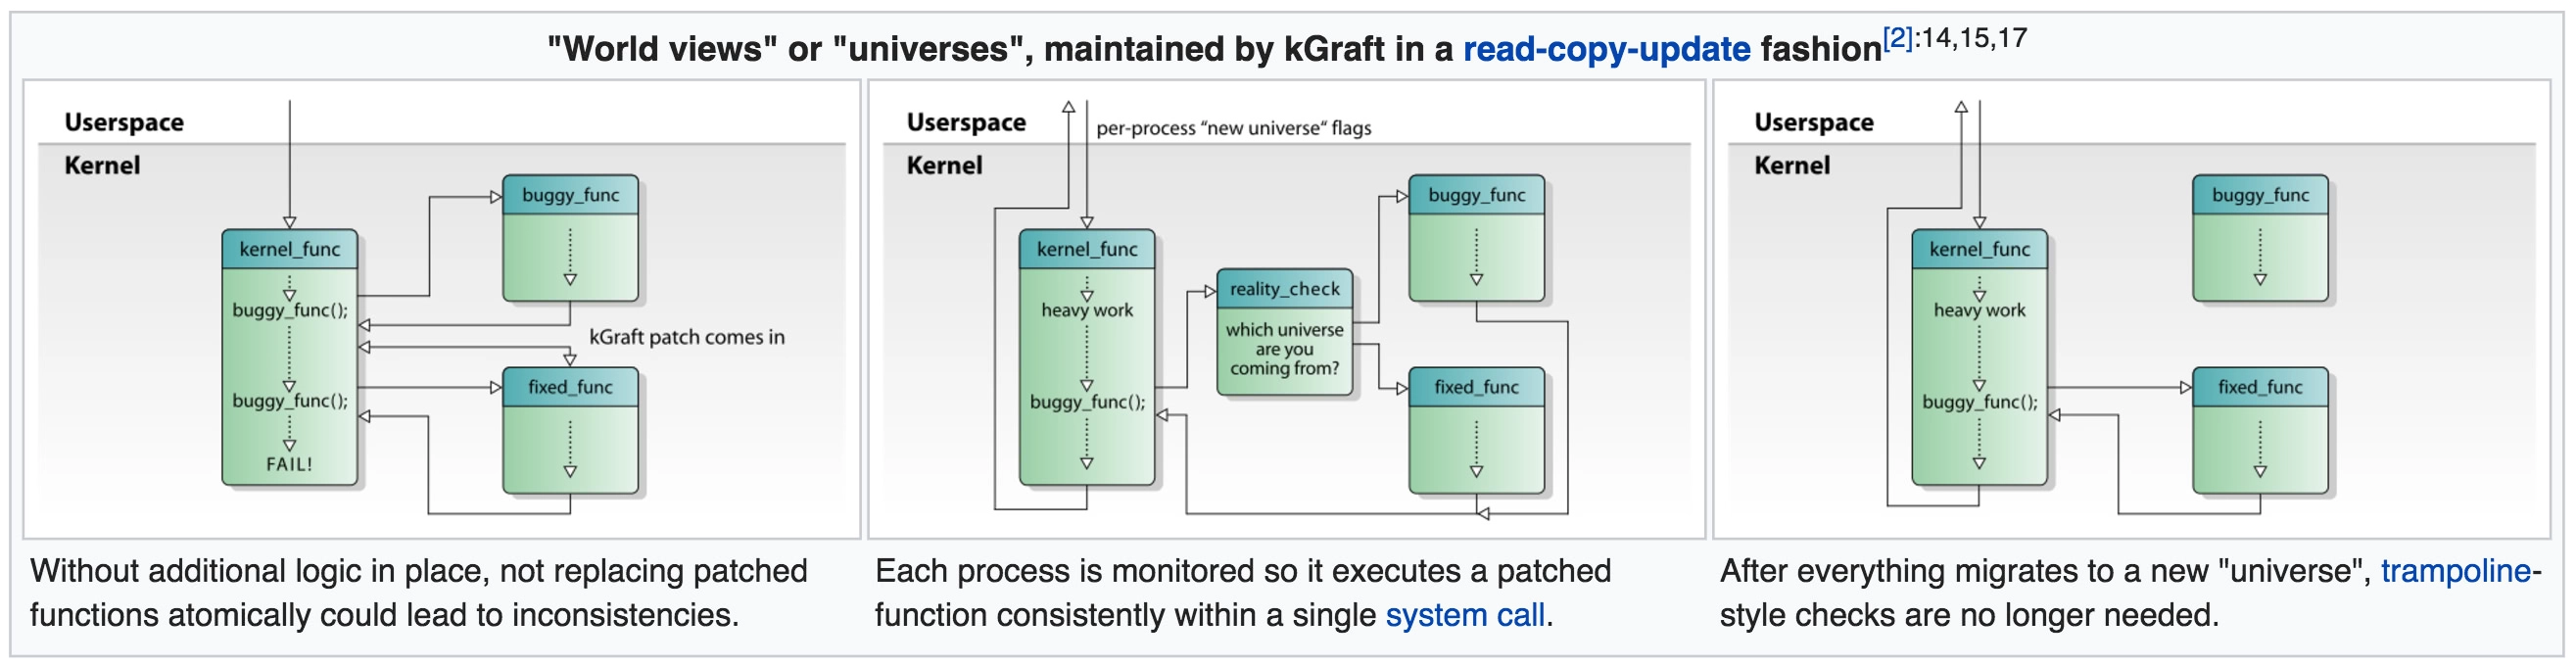 "World views" or "universes", maintained by kGraft in a read-copy-update fashion